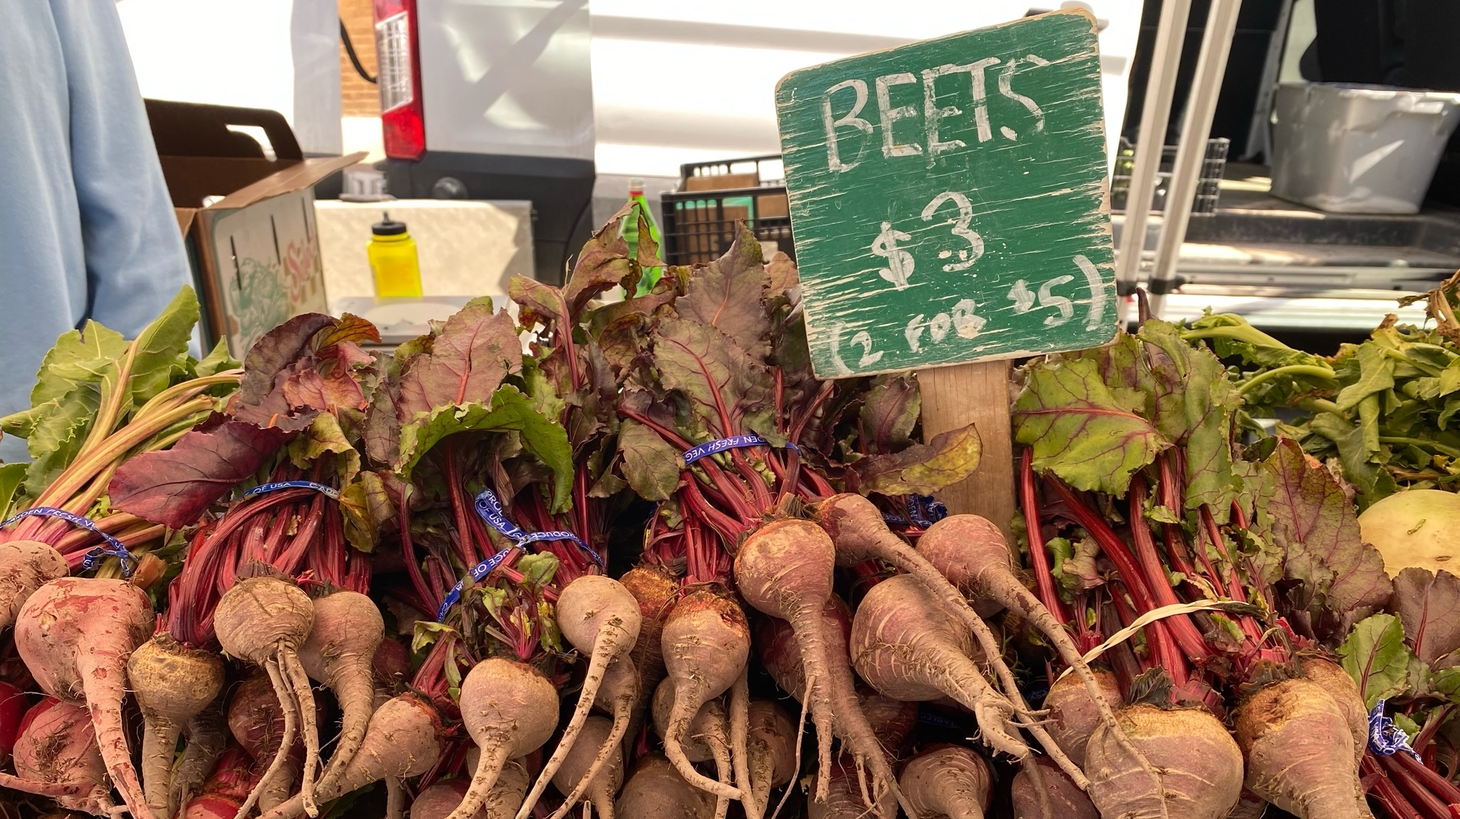 Jimenez Family Farm in Santa Ynez Valley is bringing beets to the Wednesday Santa Monica Farmer’s Market, including Detroit red, golden, and chioggia varieties.